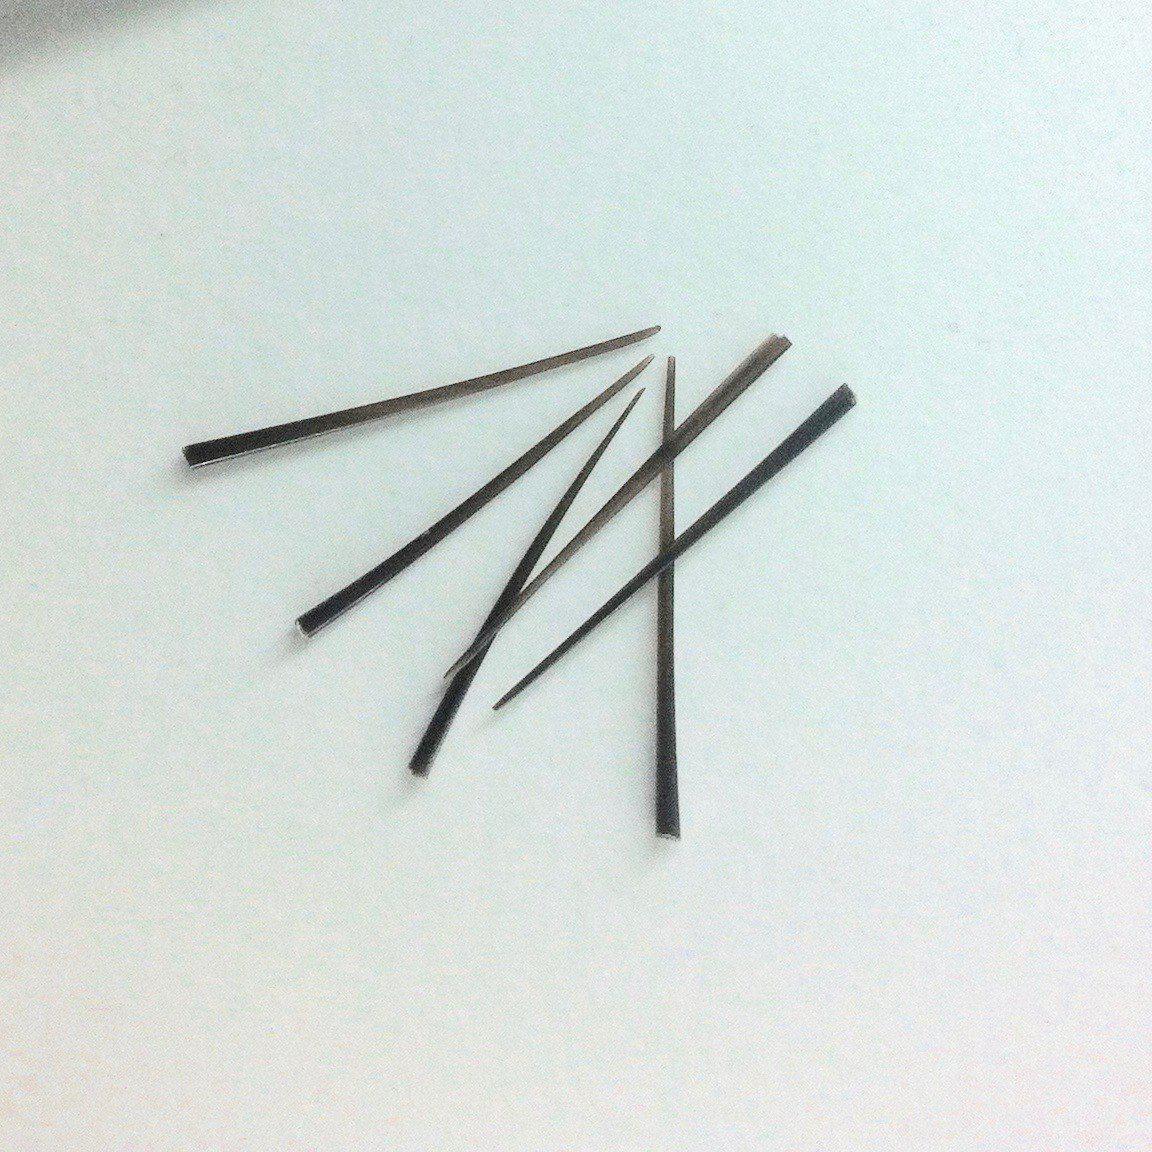 Extra posts and sticks for tribal earrings :|: Extra posts. Horn posts. extra sticks.